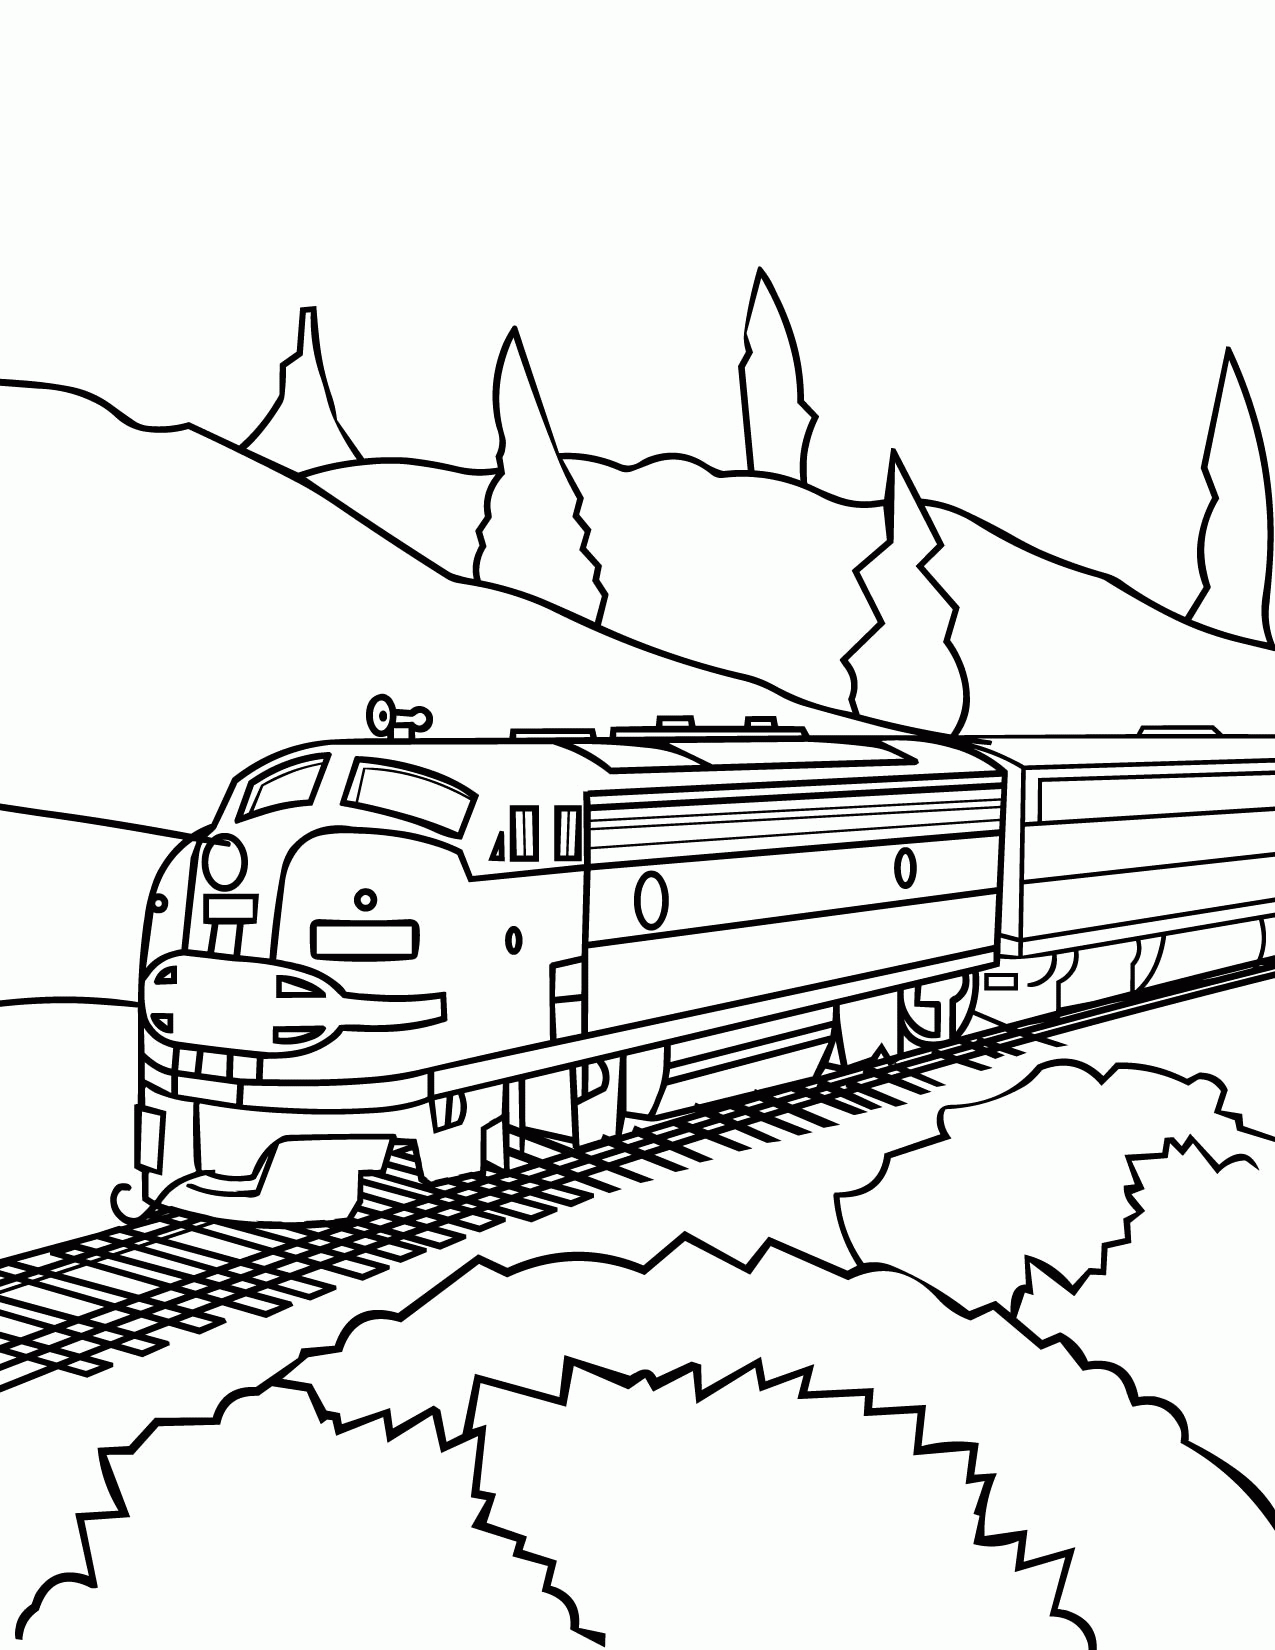 blank train coloring pages coloring home